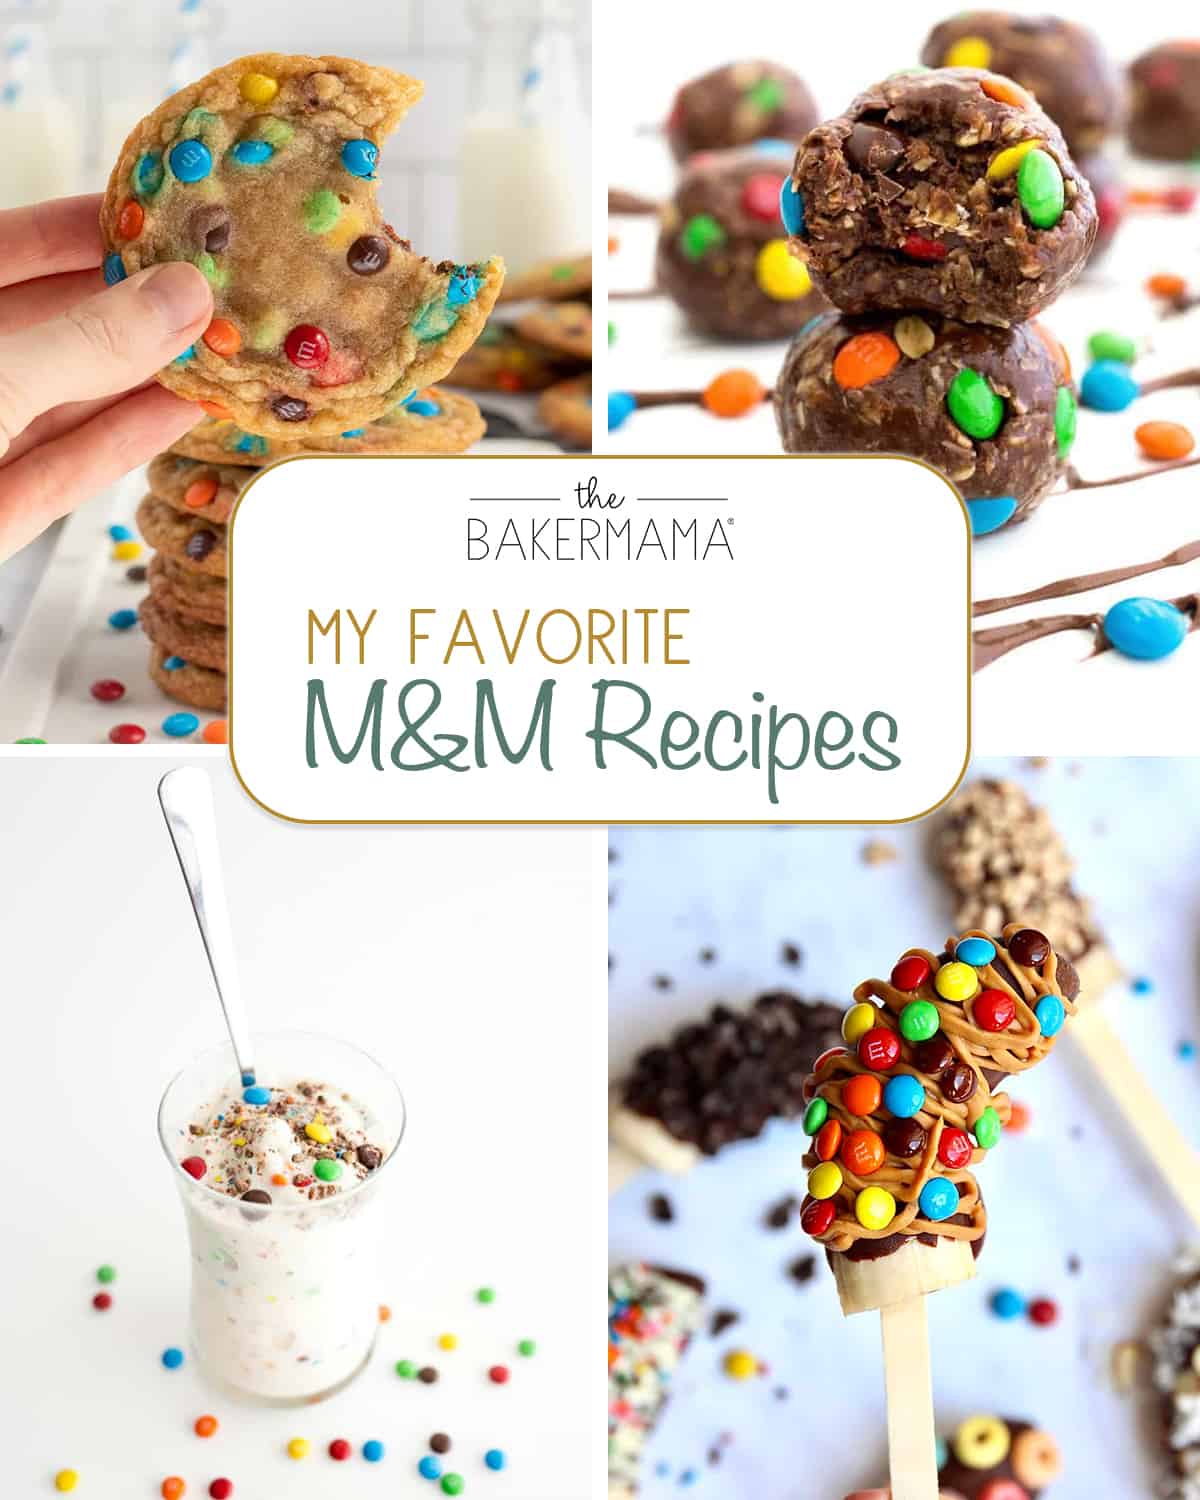 My Favorite M&M Recipes by The BakerMama